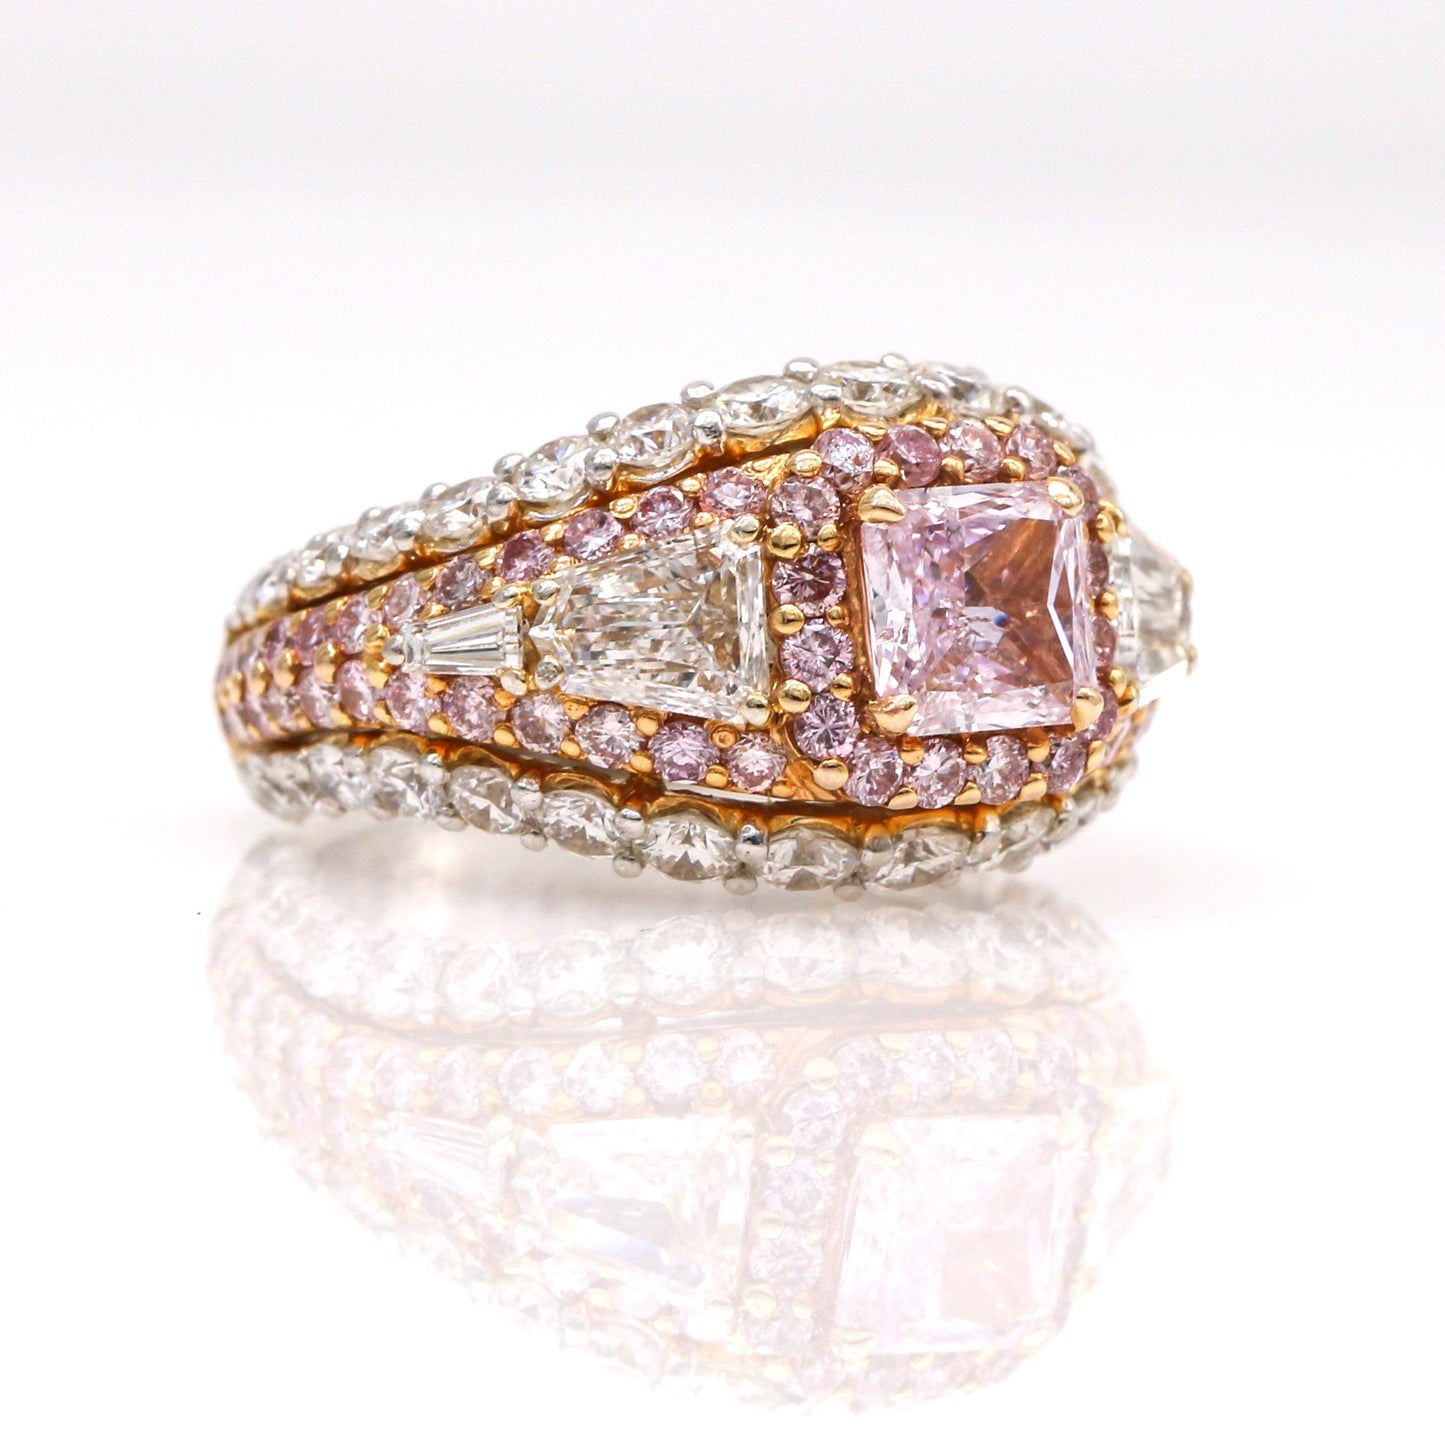 GIA Certified Fancy Pink Diamond Engagement Ring in Platinum and 18k Gold - 31 Jewels Inc.